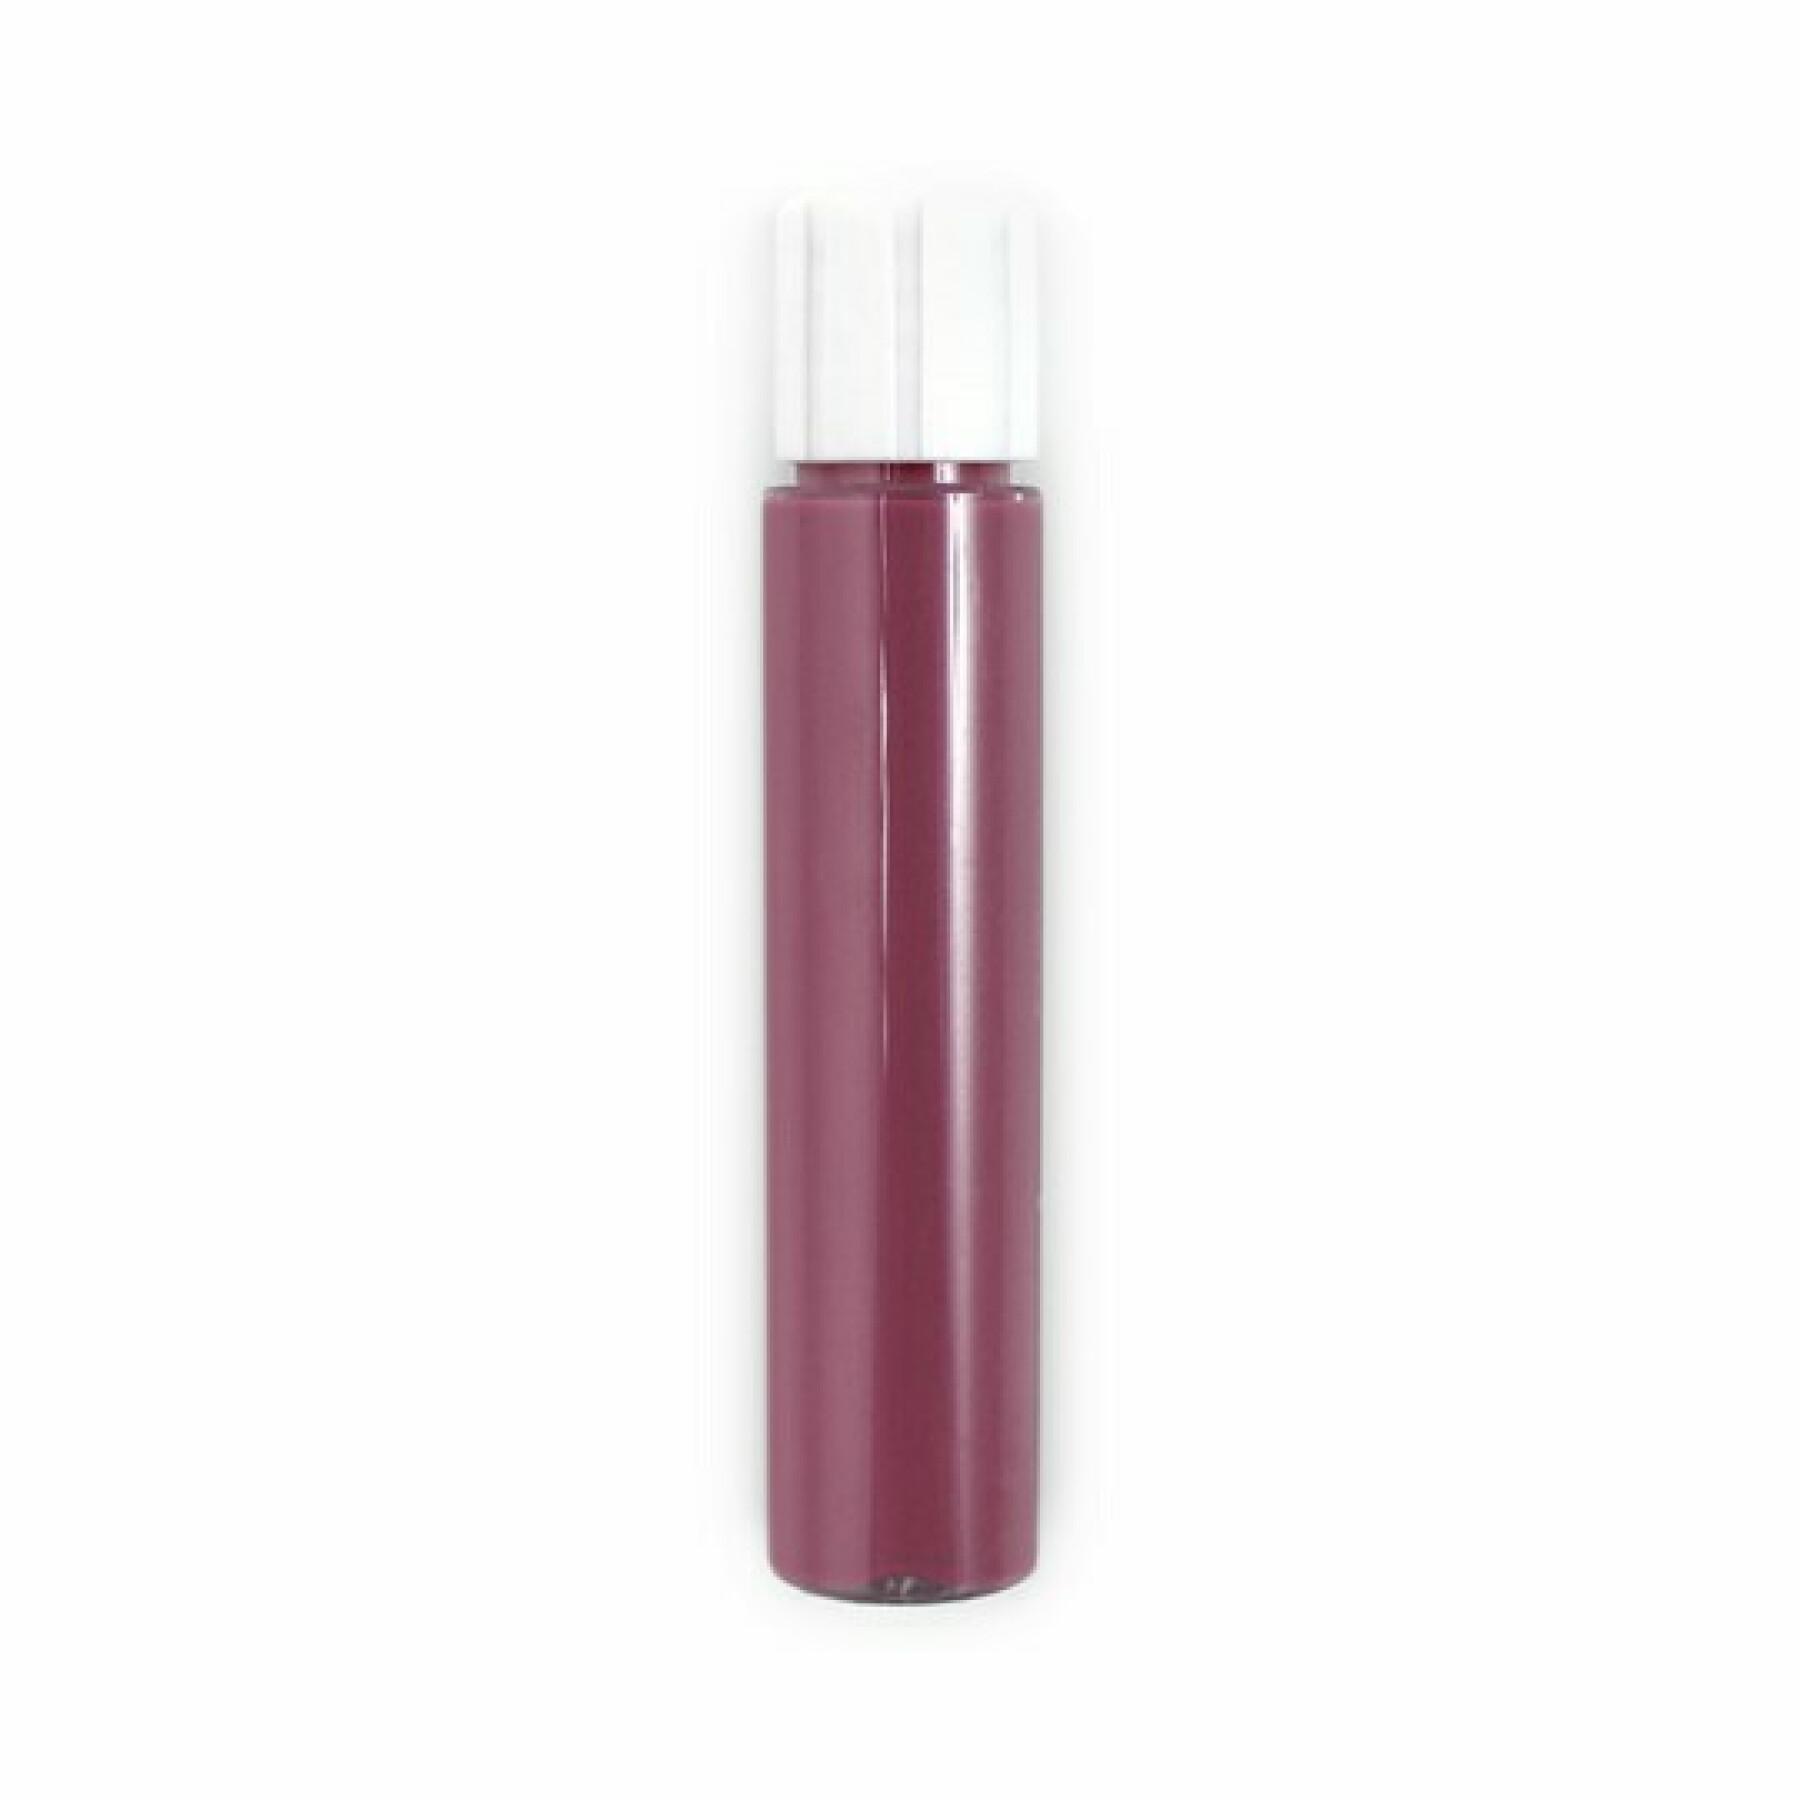 Recharge gloss 014 rose antique femme Zao - 3,8 ml